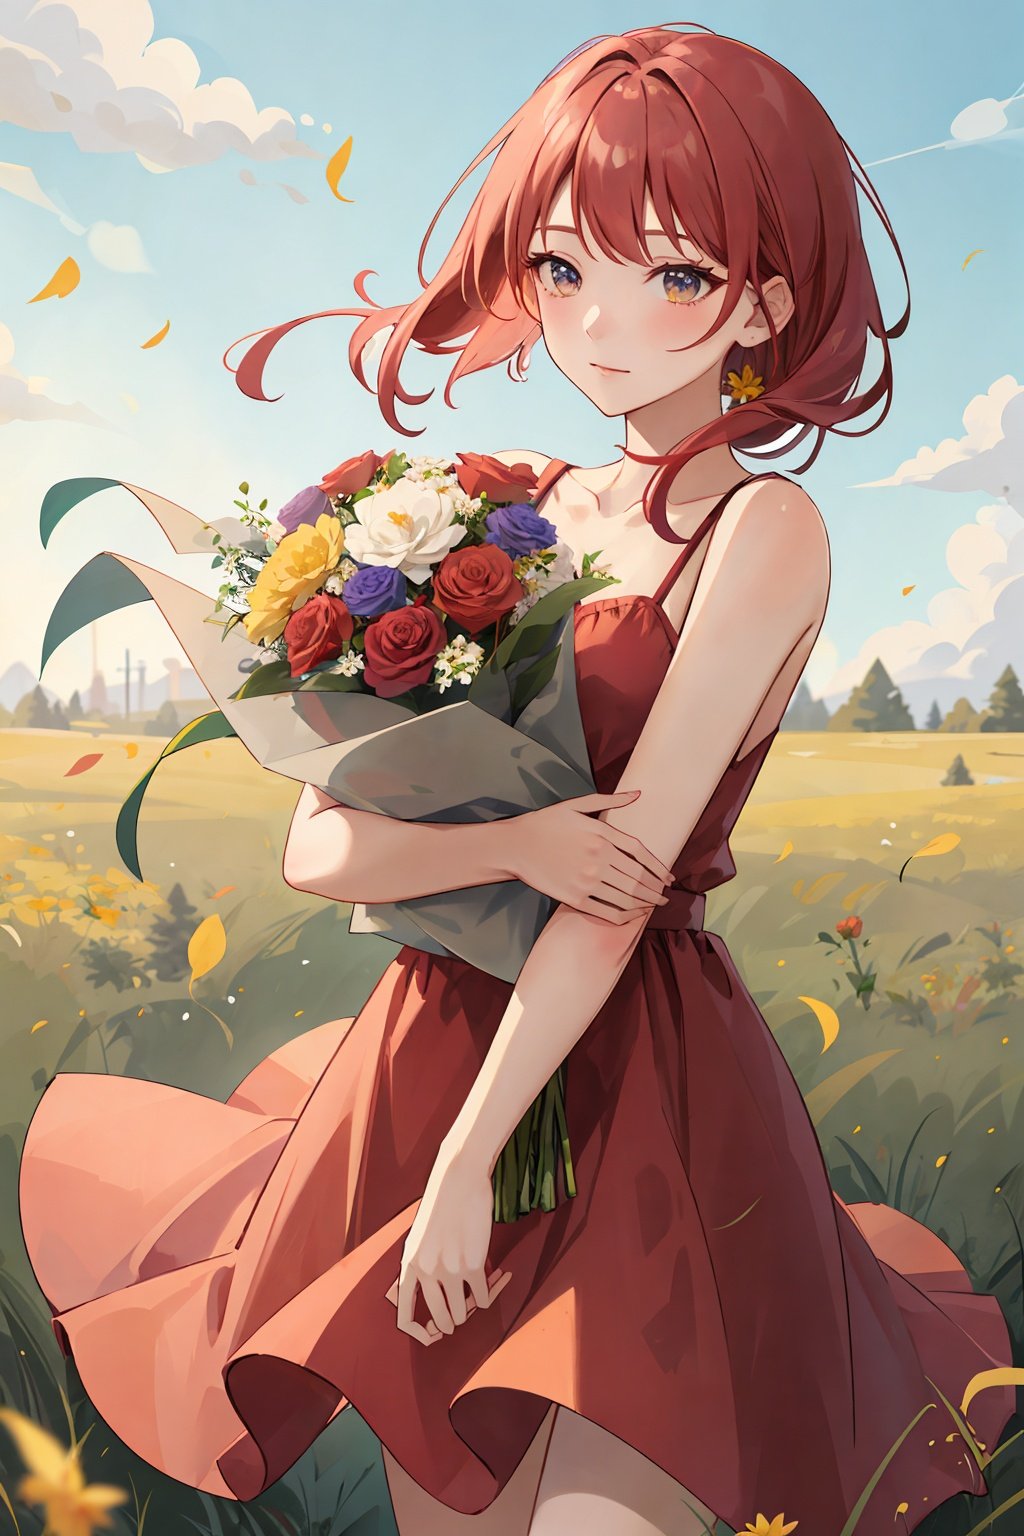 moyou,upper body,Create an image of an anime girl with bright red hair,wearing a sundress and holding a bouquet of wildflowers,standing in a field of tall grass with a soft breeze blowing through. The scene should capture the whimsical and carefree style of Sakimichan,with a sense of peace and tranquility in the air.,